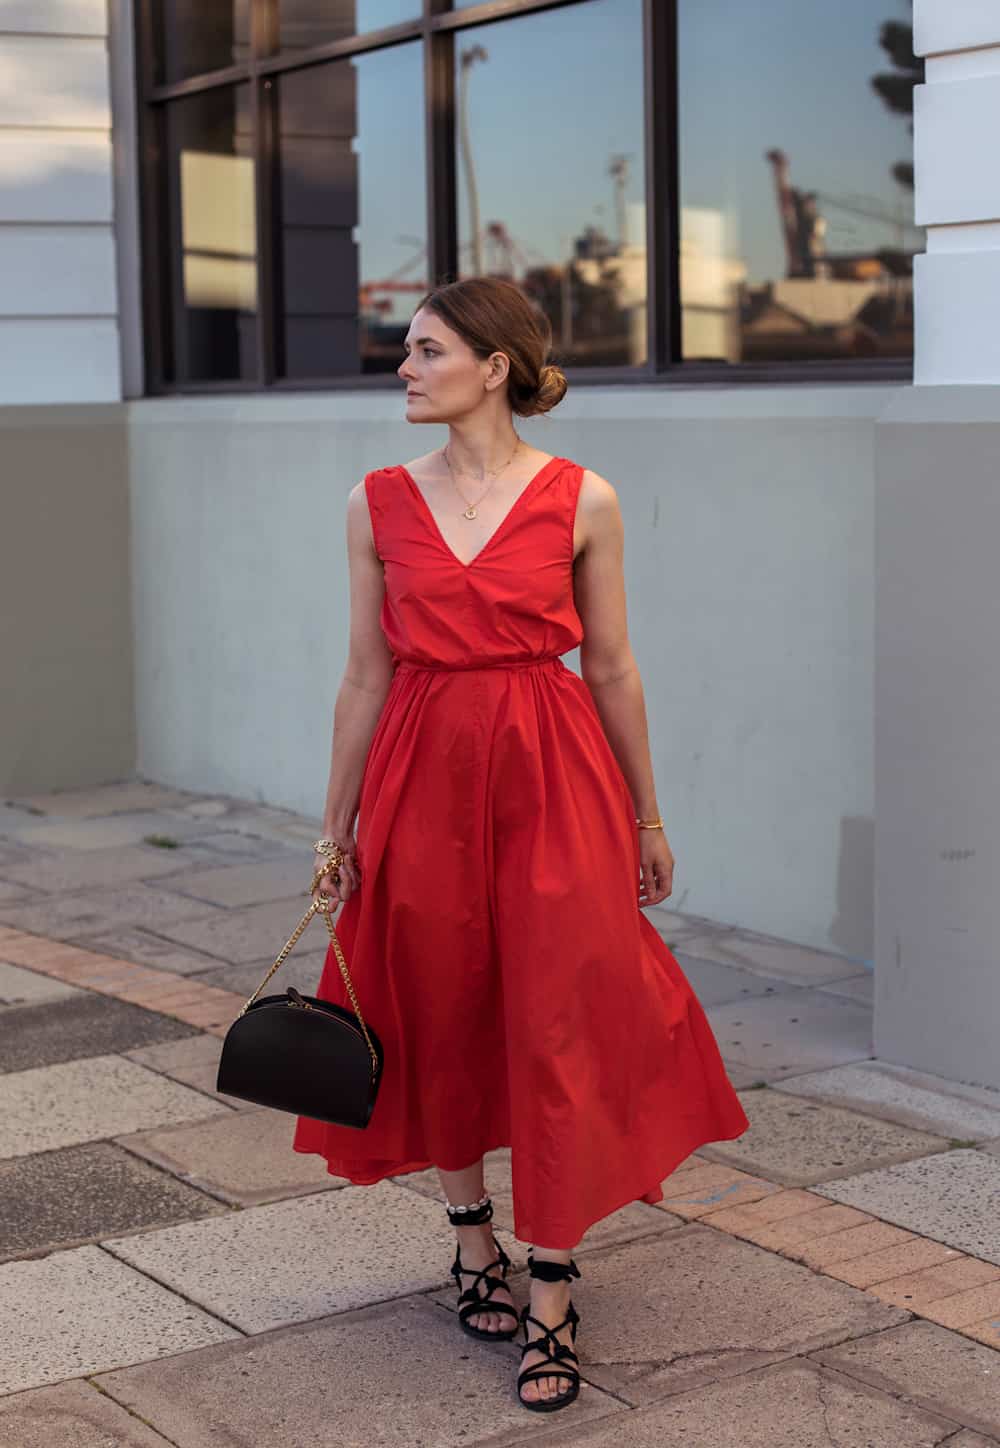 matching accessories for red gown,outfit what color shoes to wear with red dress,red dress silver shoes,casual red dress with denim jacket,